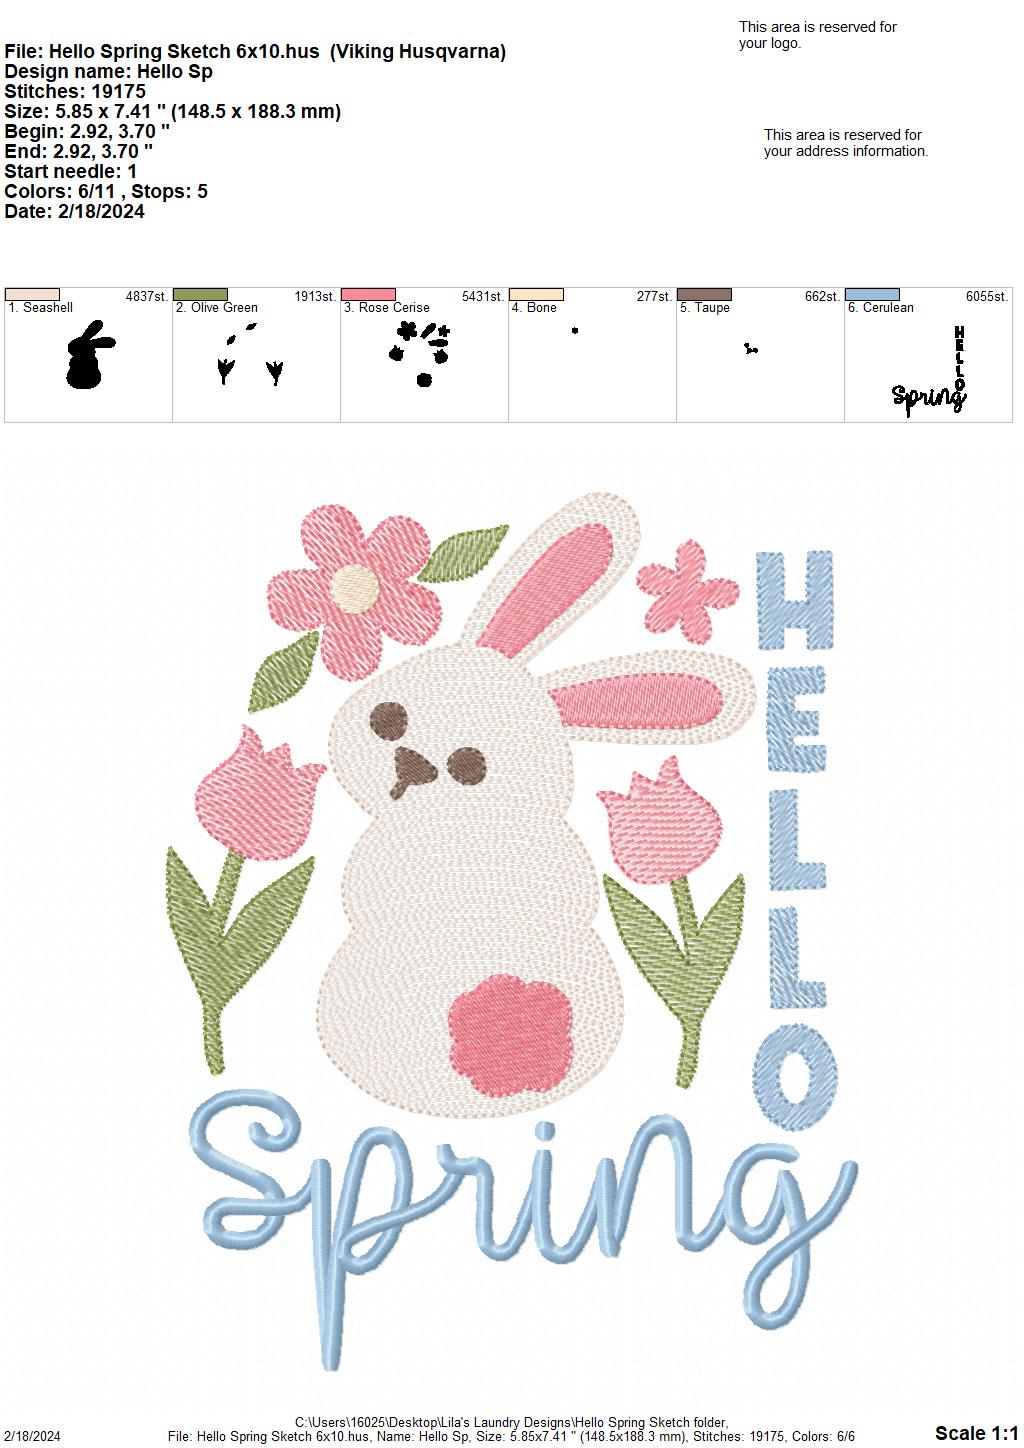 Hello Spring Sketch - 4 Sizes - Digital Embroidery Design